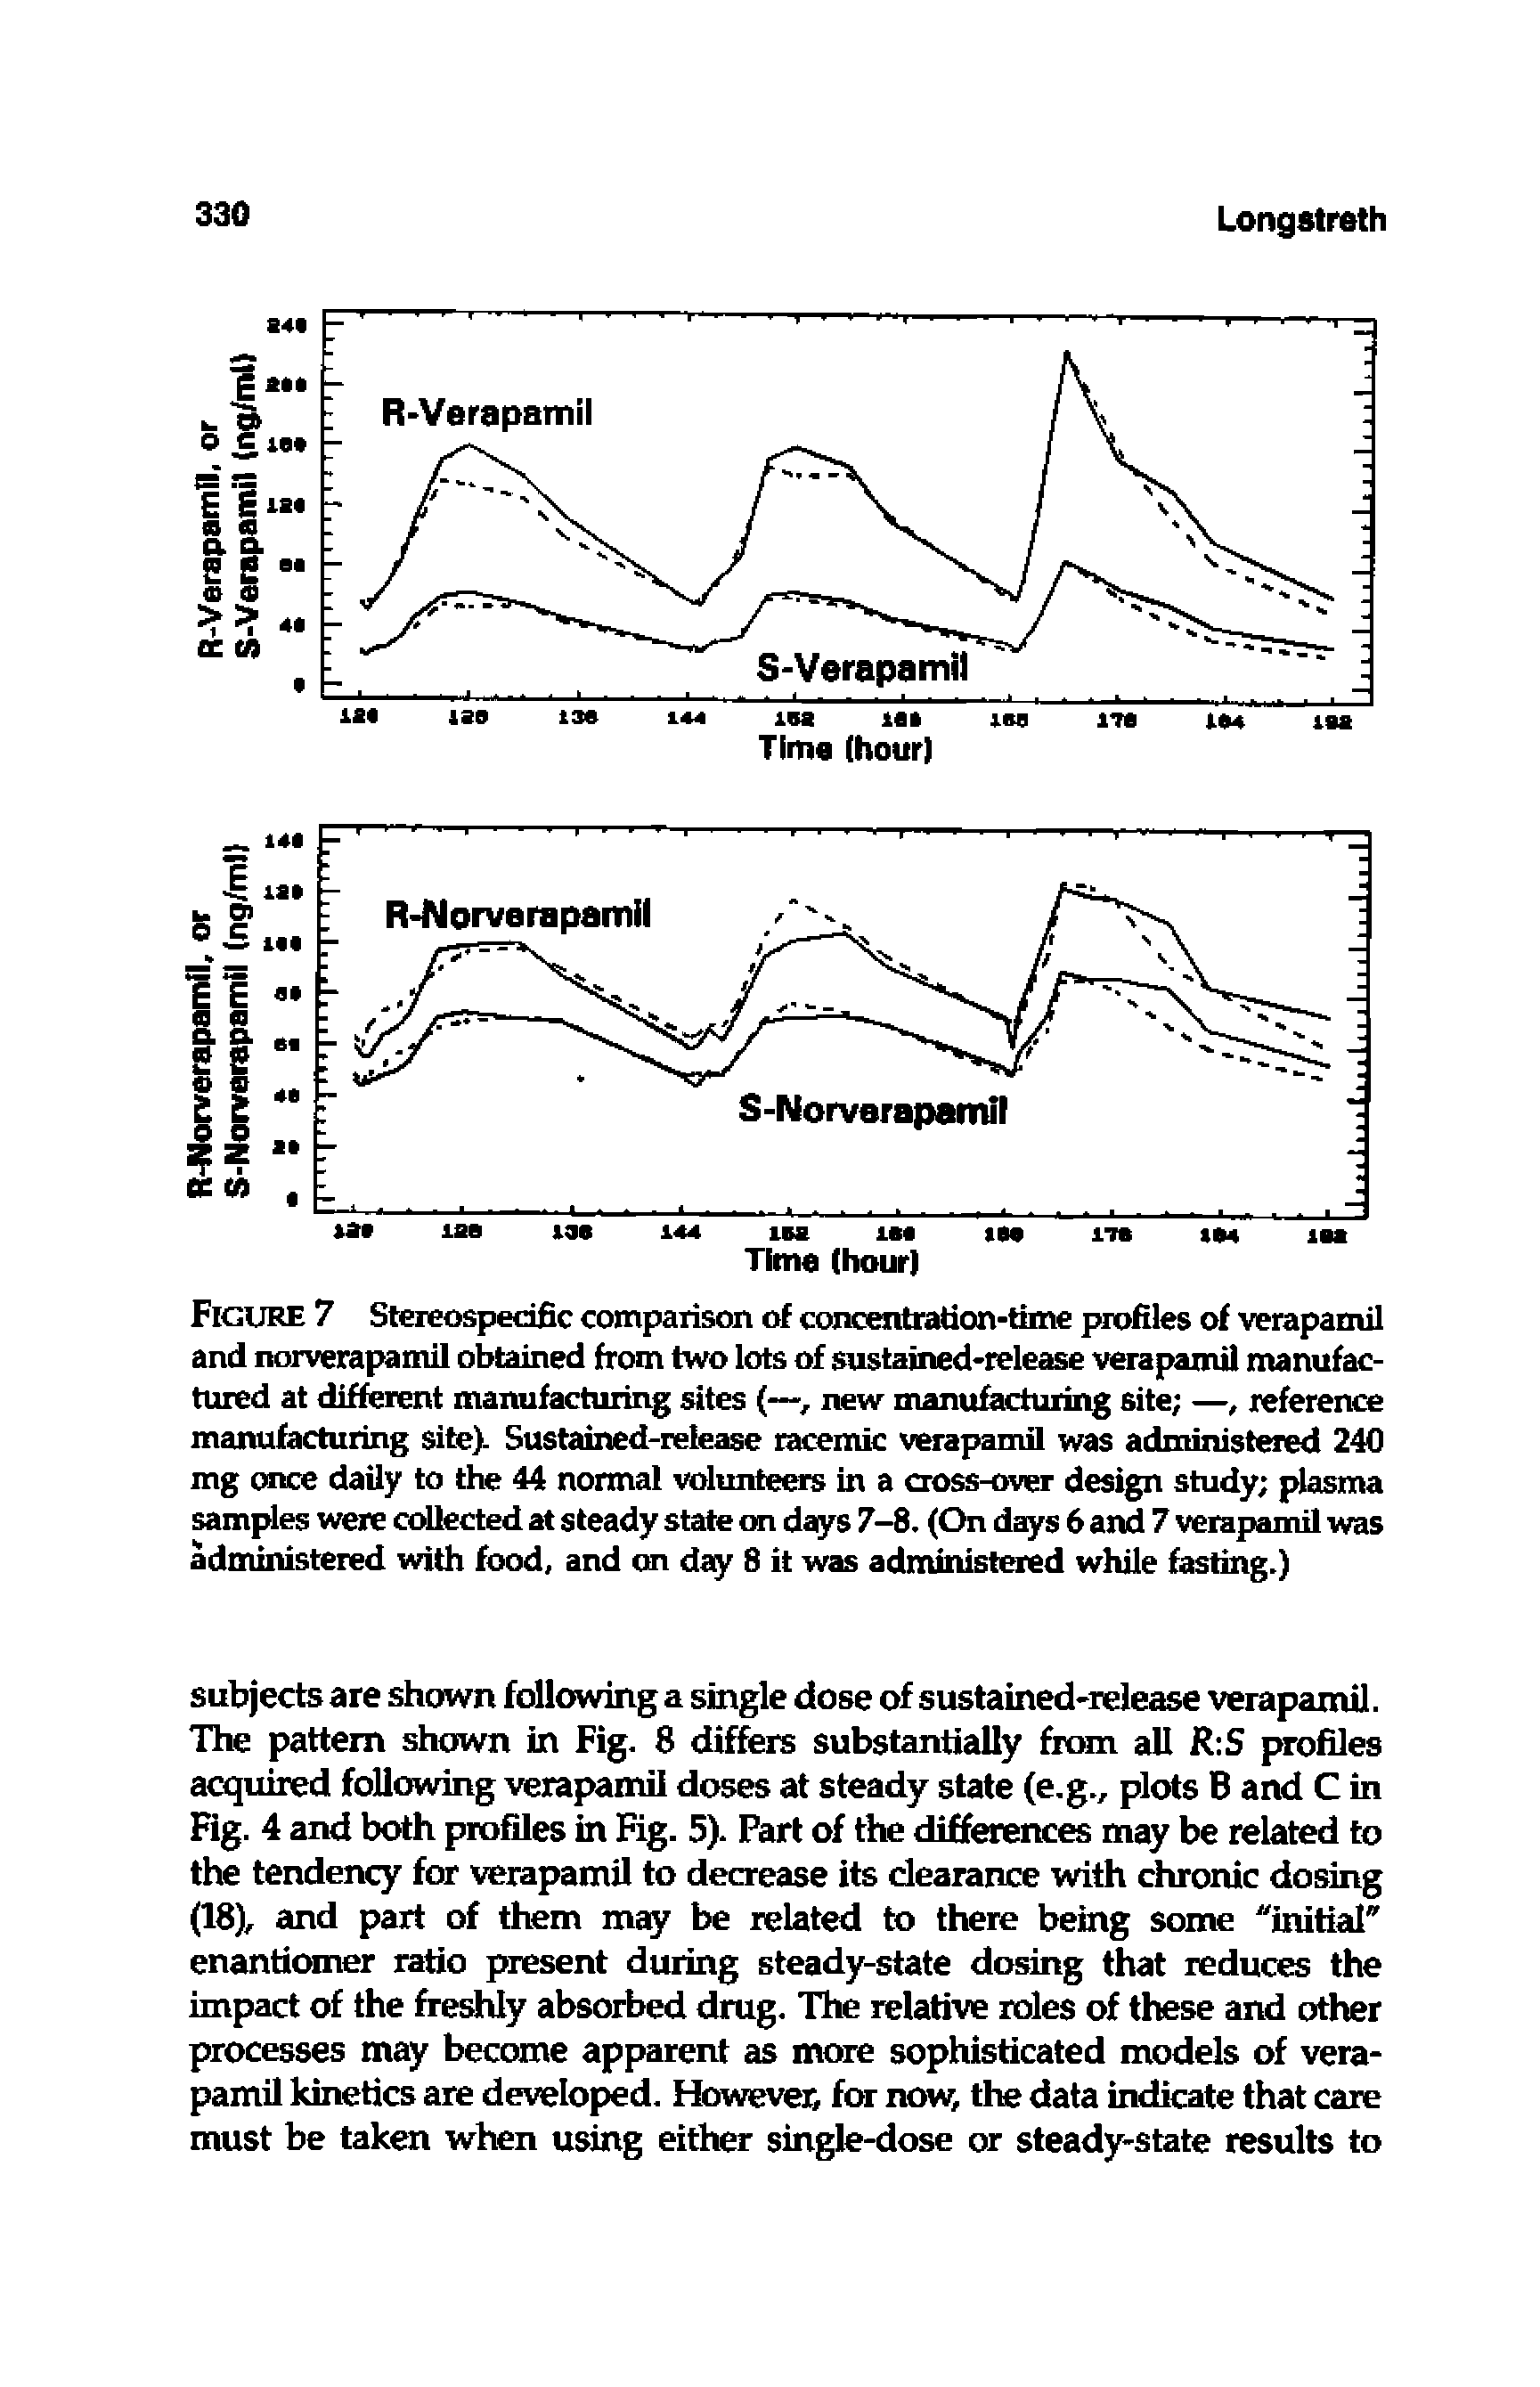 Figure 7 Stereospedfic comparison of concentration-time profiles of verapamil and norverapamil obtained from two lots of sustained-release verapamil manufactured at different manufacturing sites (—new manufacturing site —, reference manufacturing site). Sustained-release racemic verapamil was administered 240 mg once daily to the 44 normal volunteers in a cross-over design study plasma samples were collected at steady state on d s 7-8. (On days 6 and 7 verapamil was administered with food, and on day 8 it was administered while fasting.)...